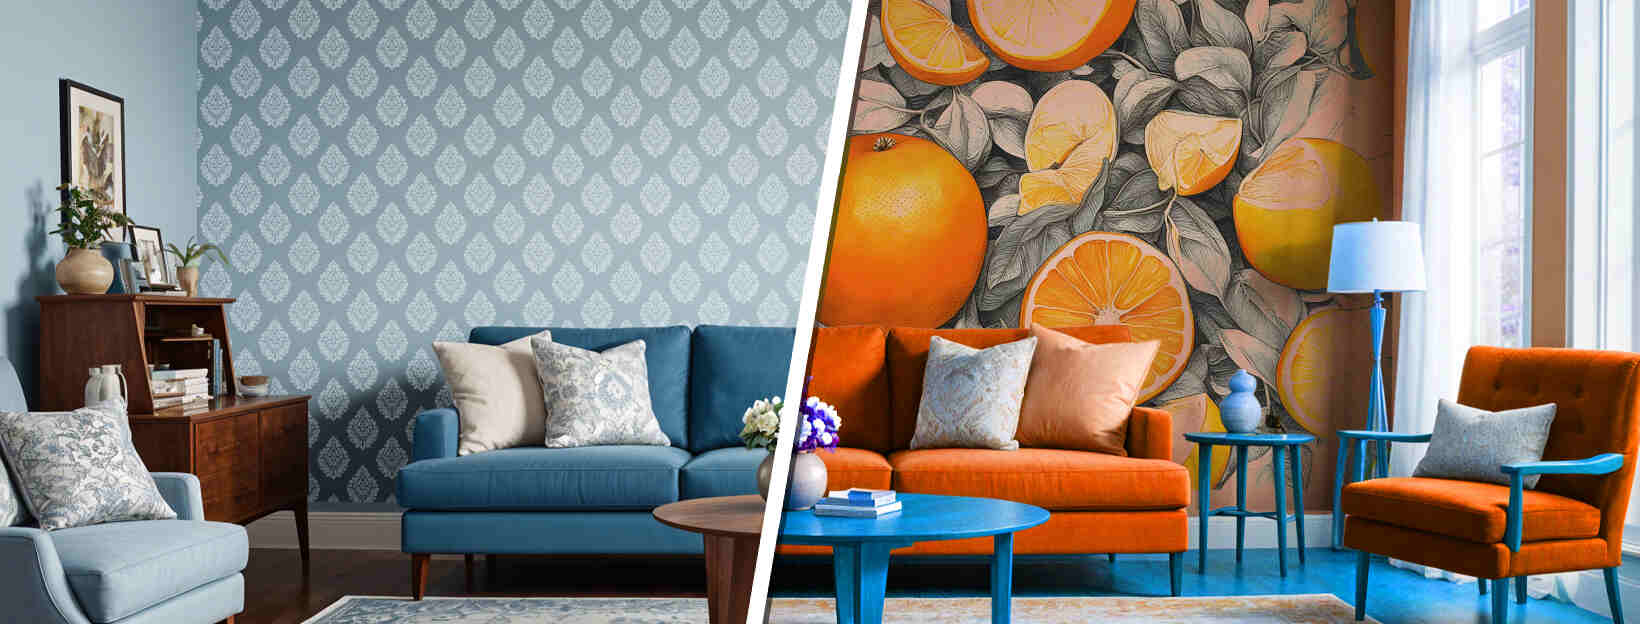 Custom Wallpapers Vs Wall Murals: 10 Key Differences